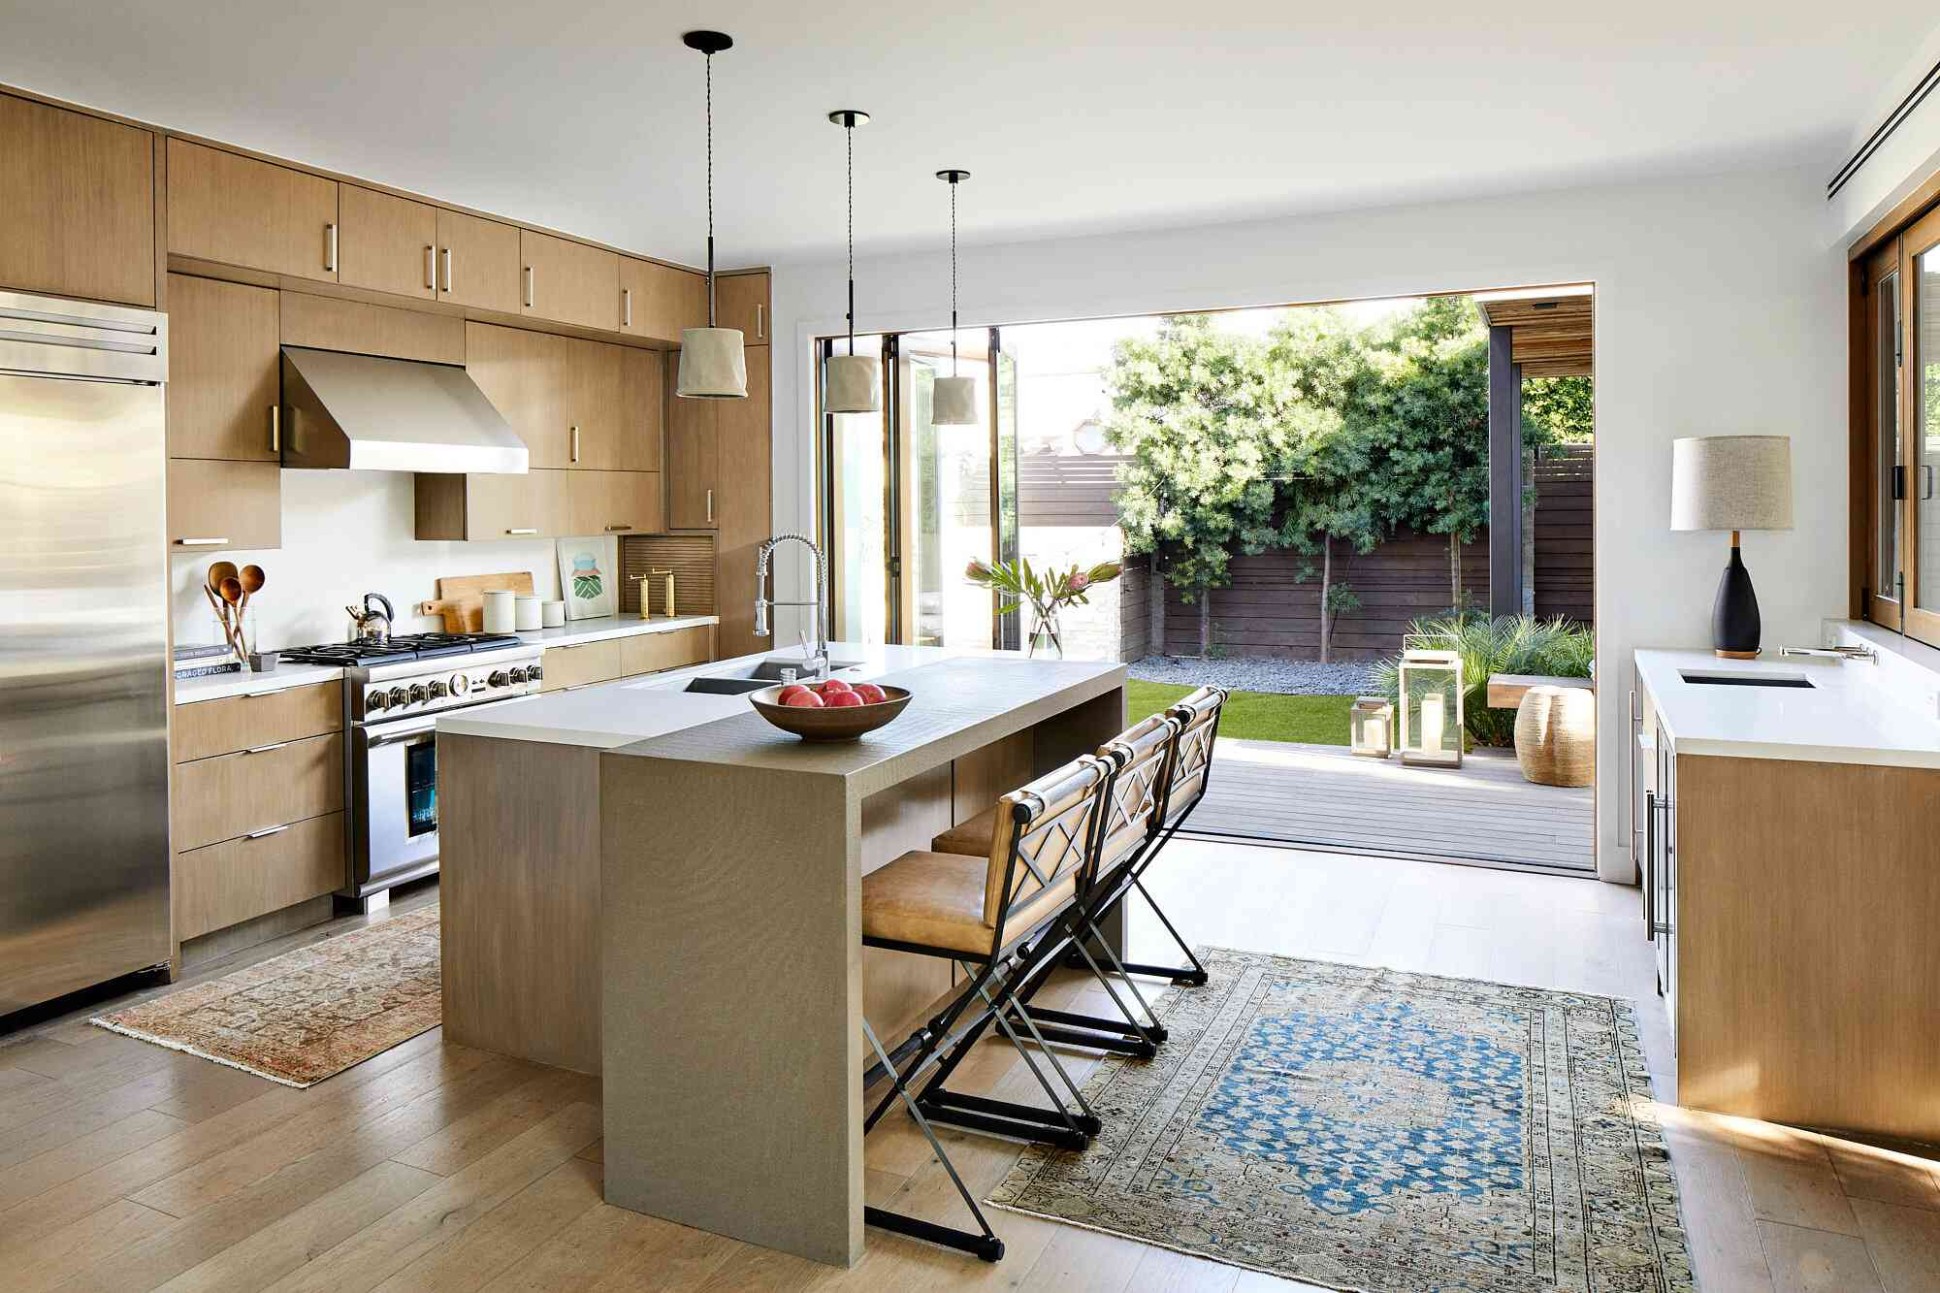 5 Open Kitchen Ideas That Are Spacious and Functional - modern open kitchen design